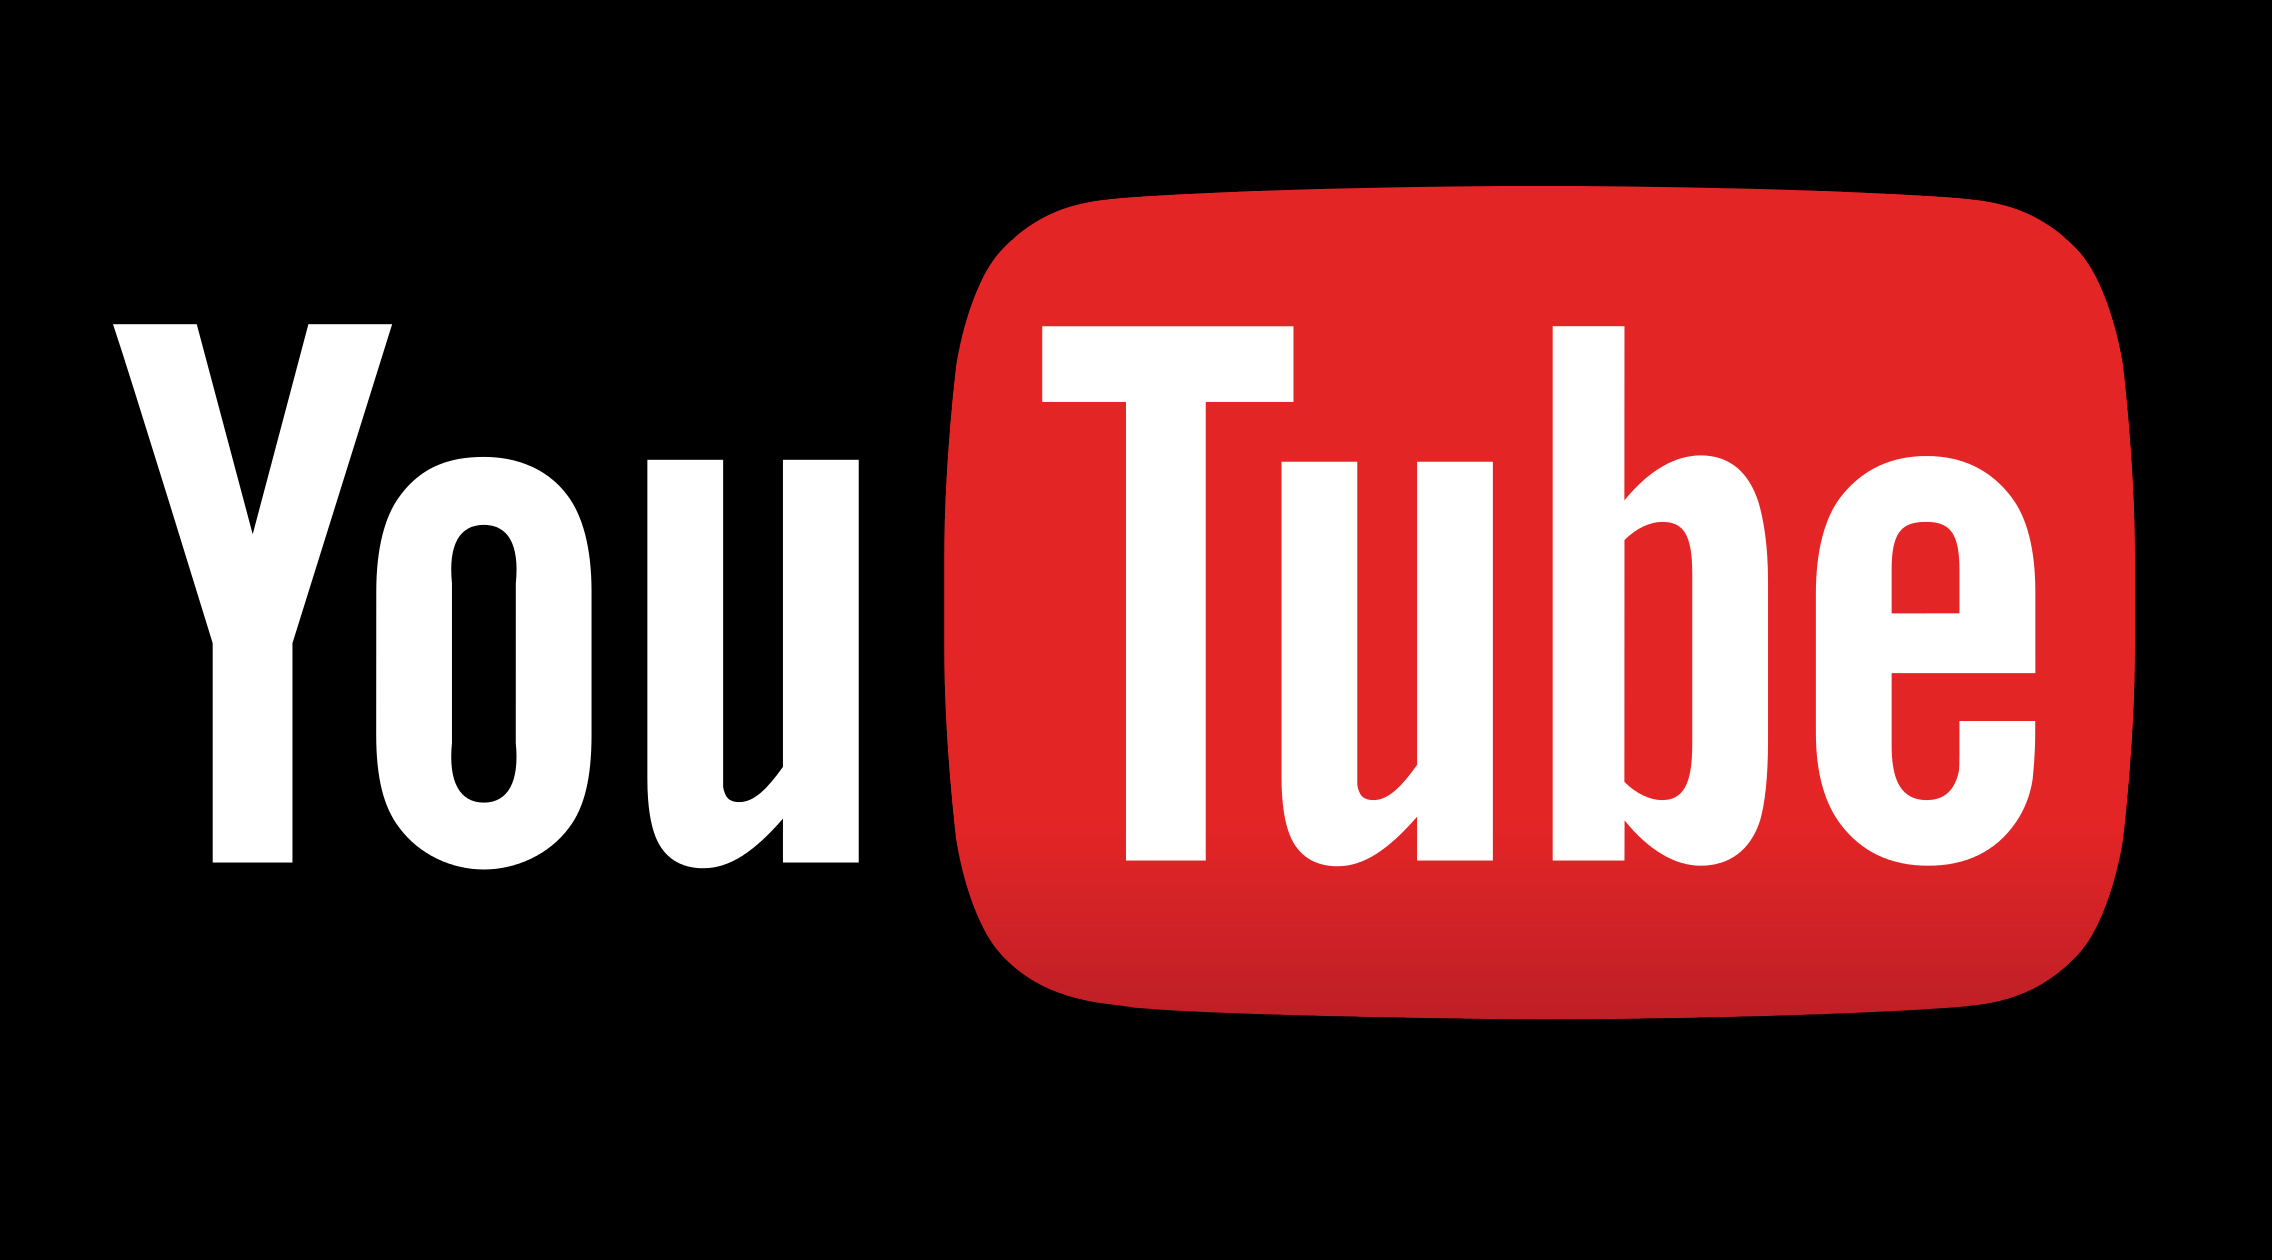 The logo for YouTube with a black background.